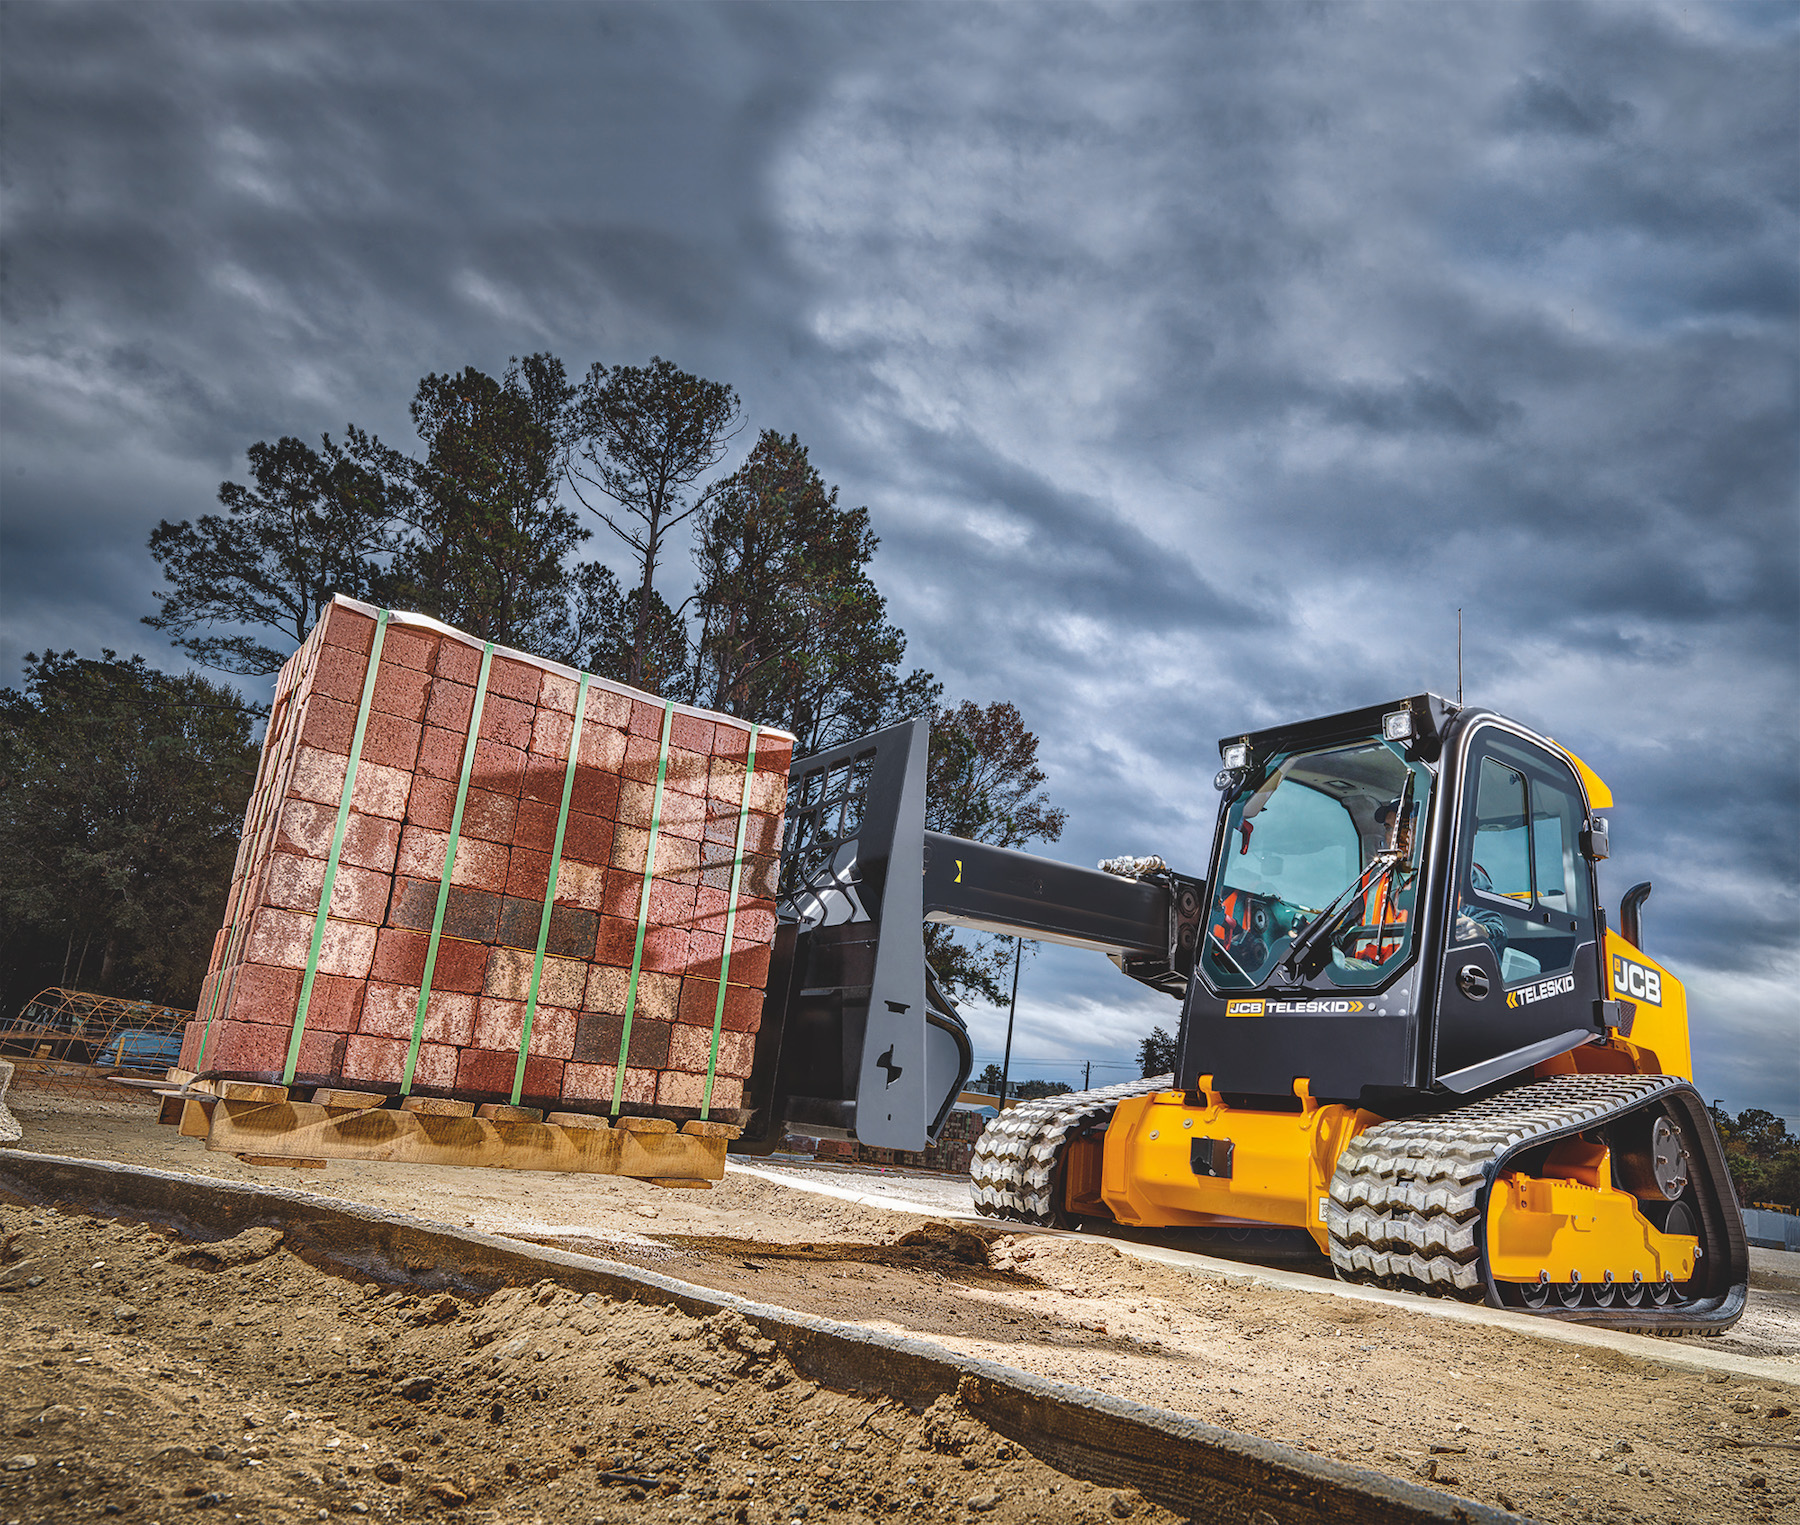 The JCB Teleskid is the world’s only skid steer and compact track loader with a telescopic boom, allowing operators to lift above 13 feet, reach forward 8 feet and dig 3 feet below grade.